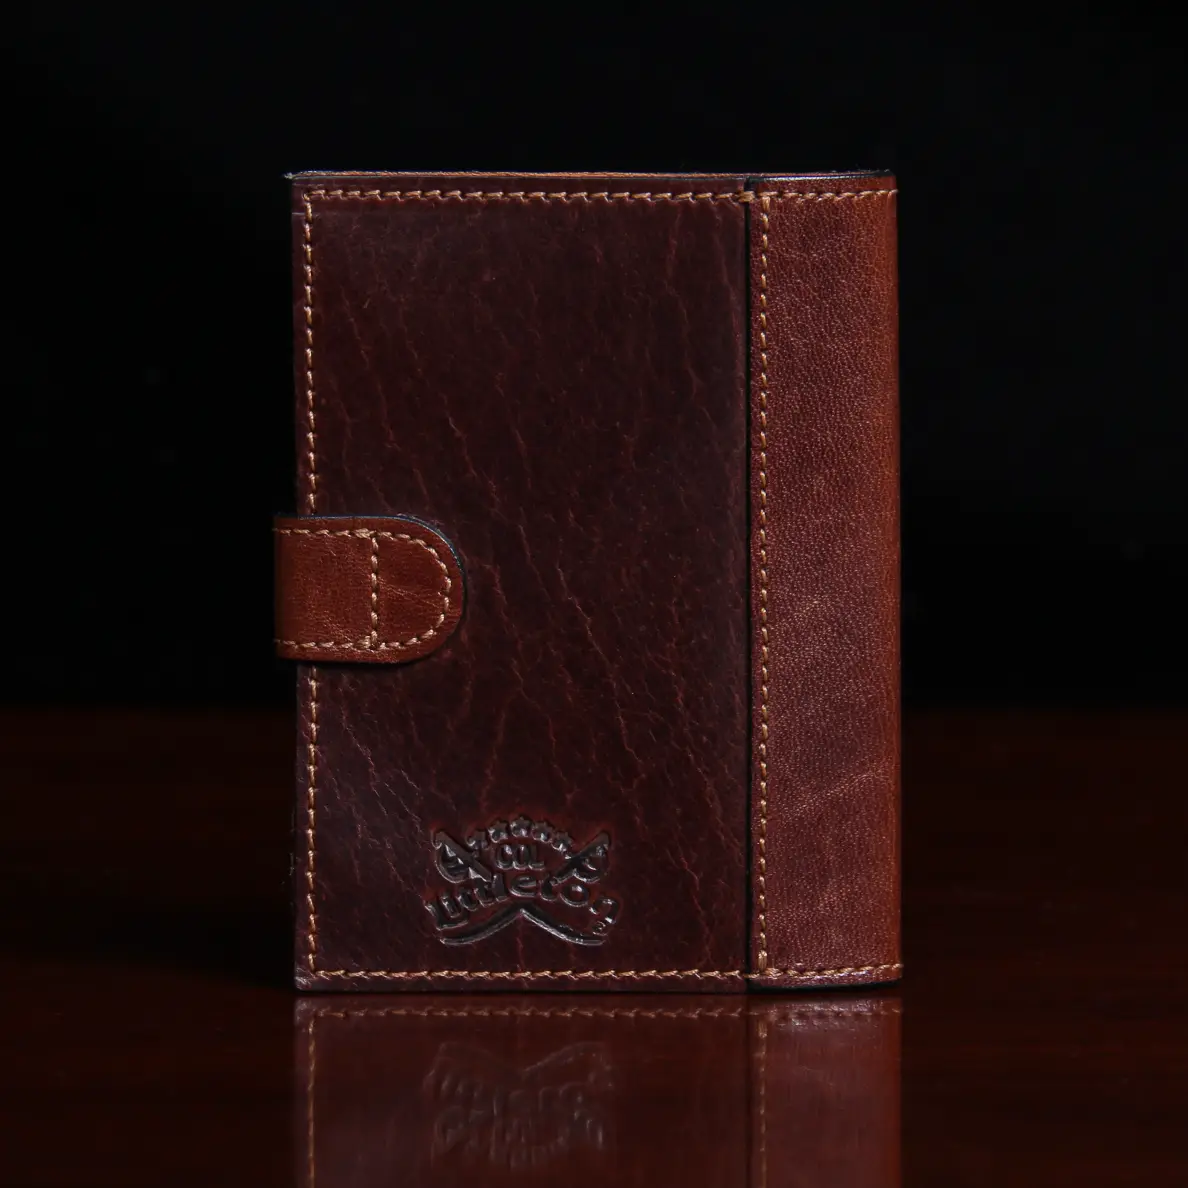 back view of dark brown leather wallet with snap closure